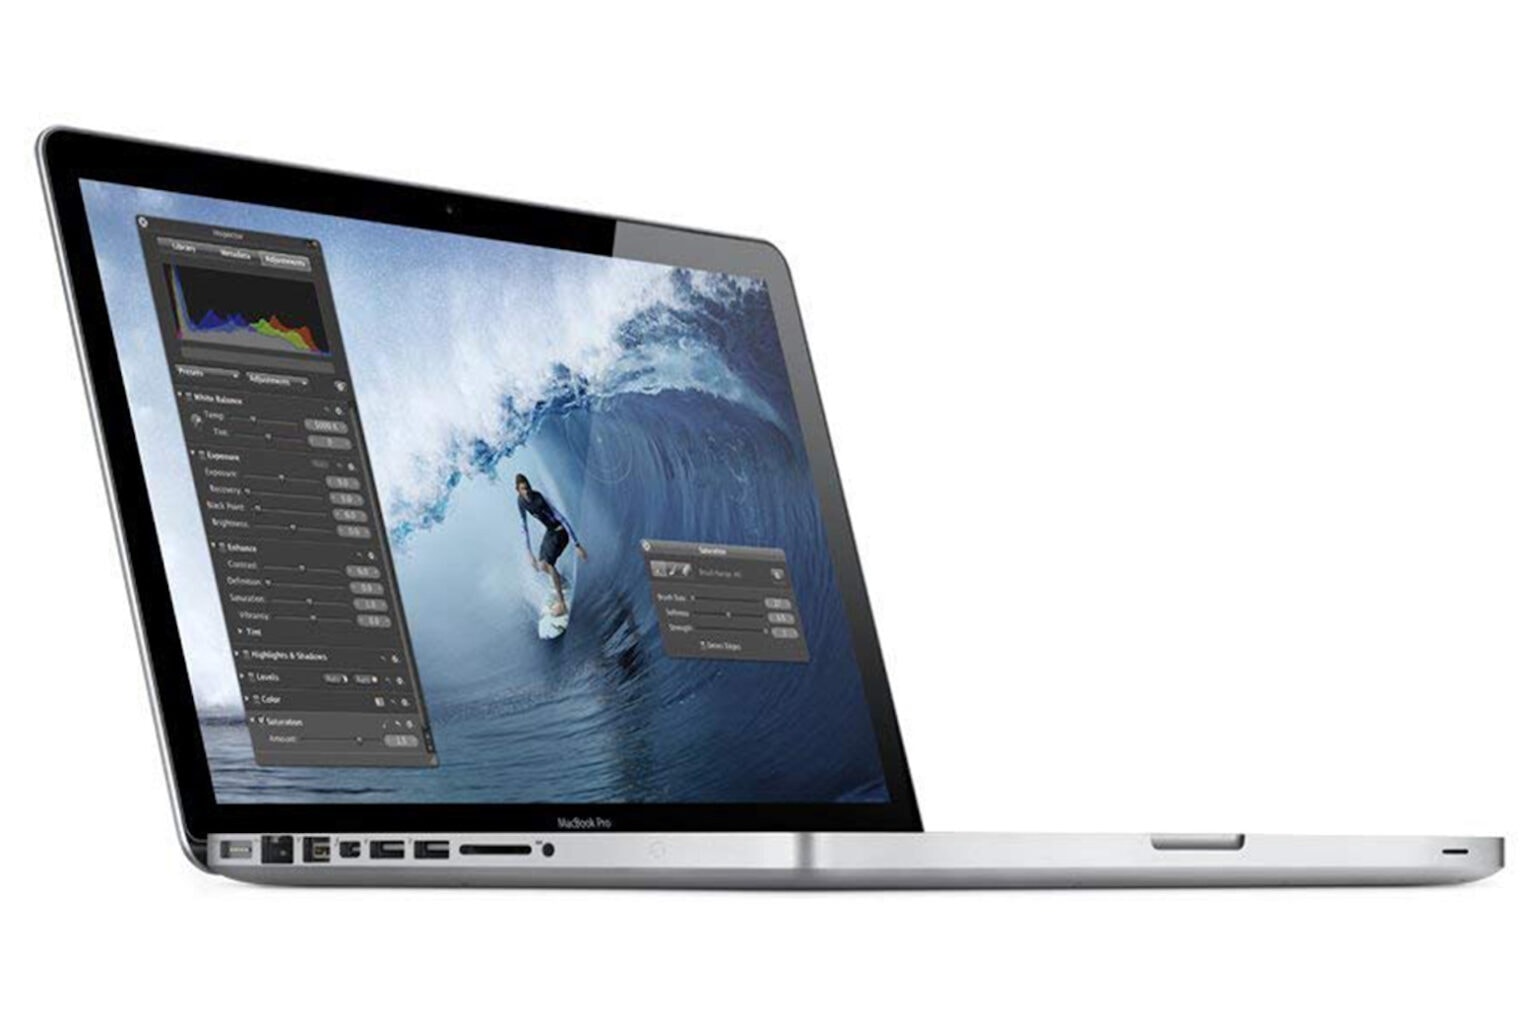 Pick up this refurbished Apple MacBook Pro, featuring 500GB of storage, for only $299.99.